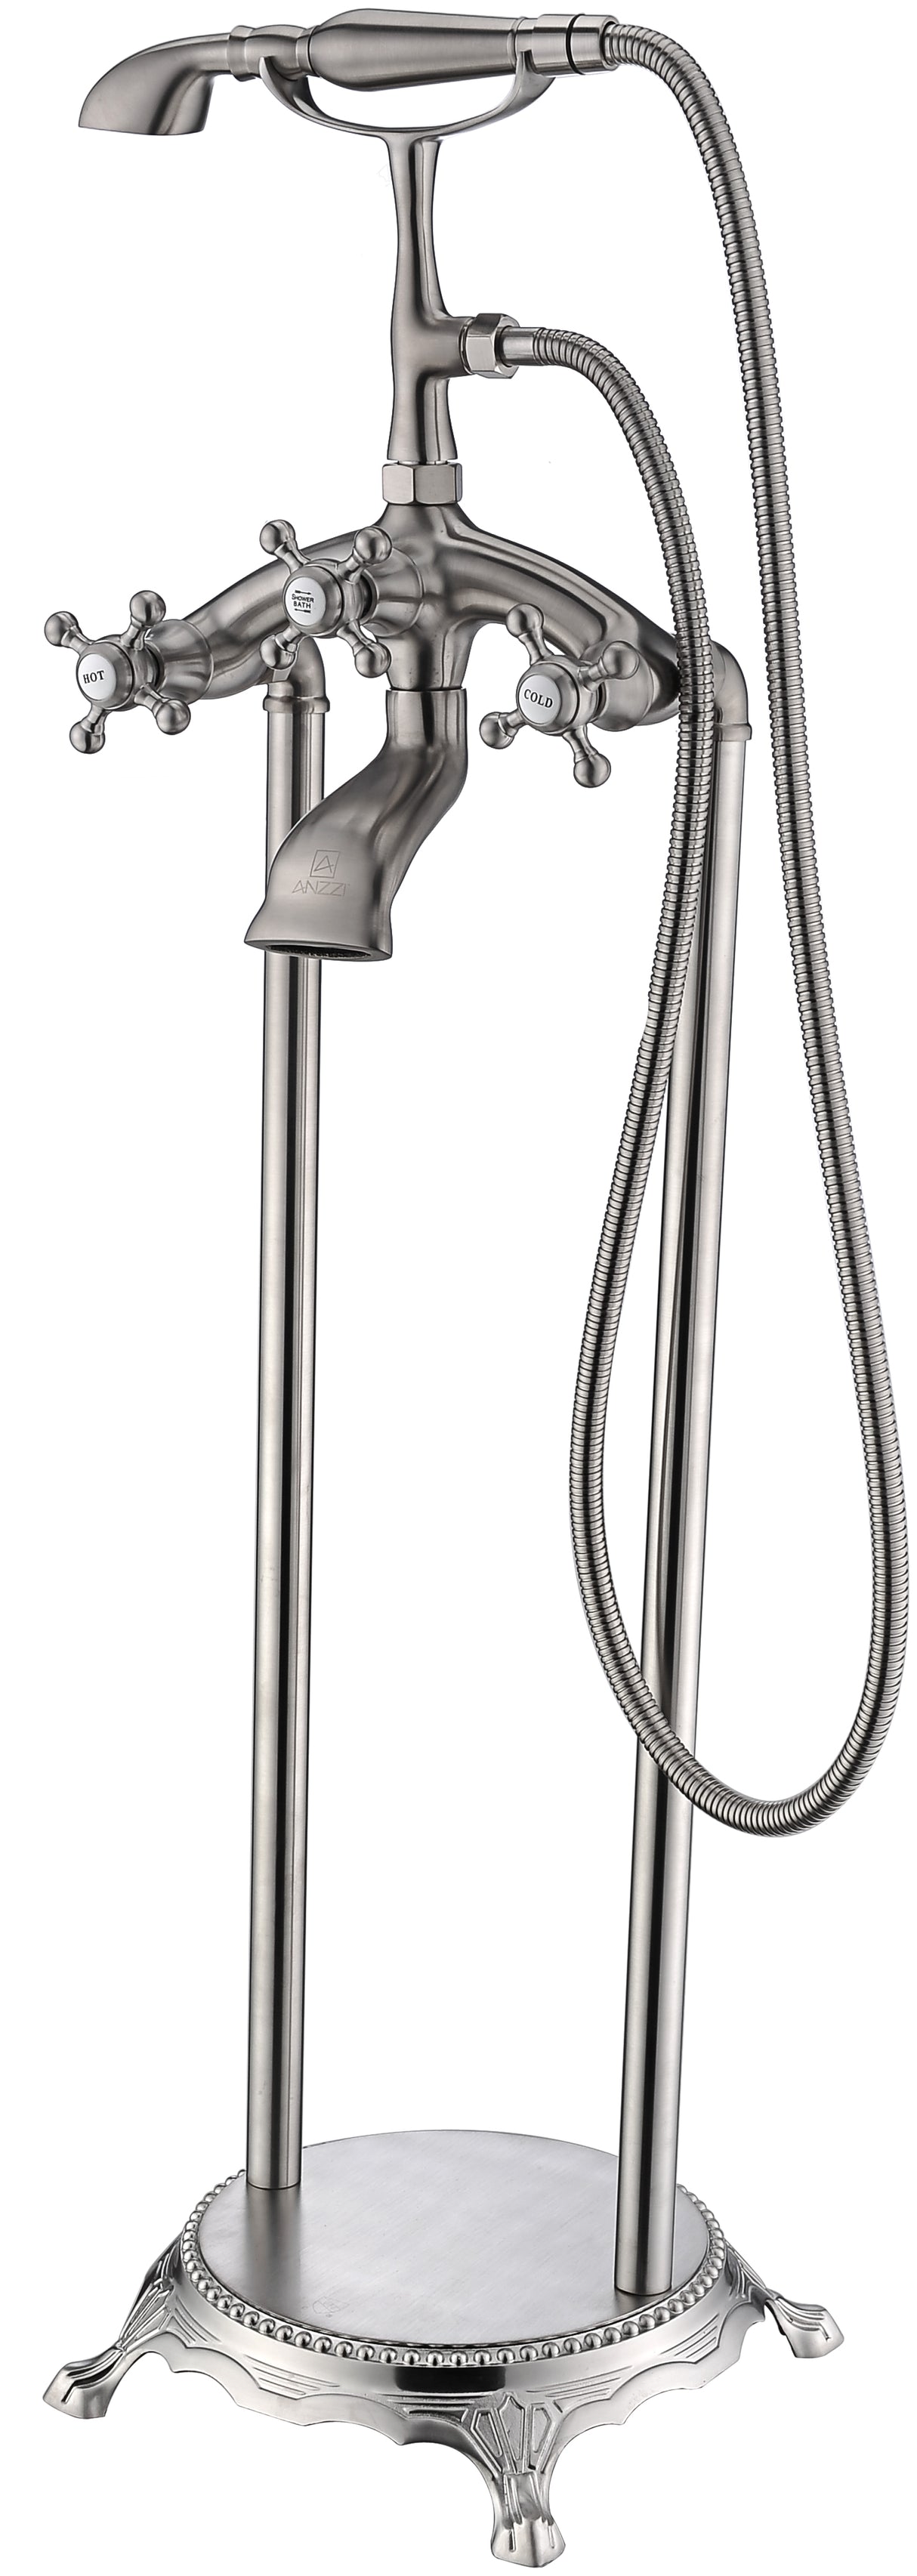 ANZZI FS-AZ0052BN Tugela 3-Handle Claw Foot Tub Faucet with Hand Shower in Brushed Nickel